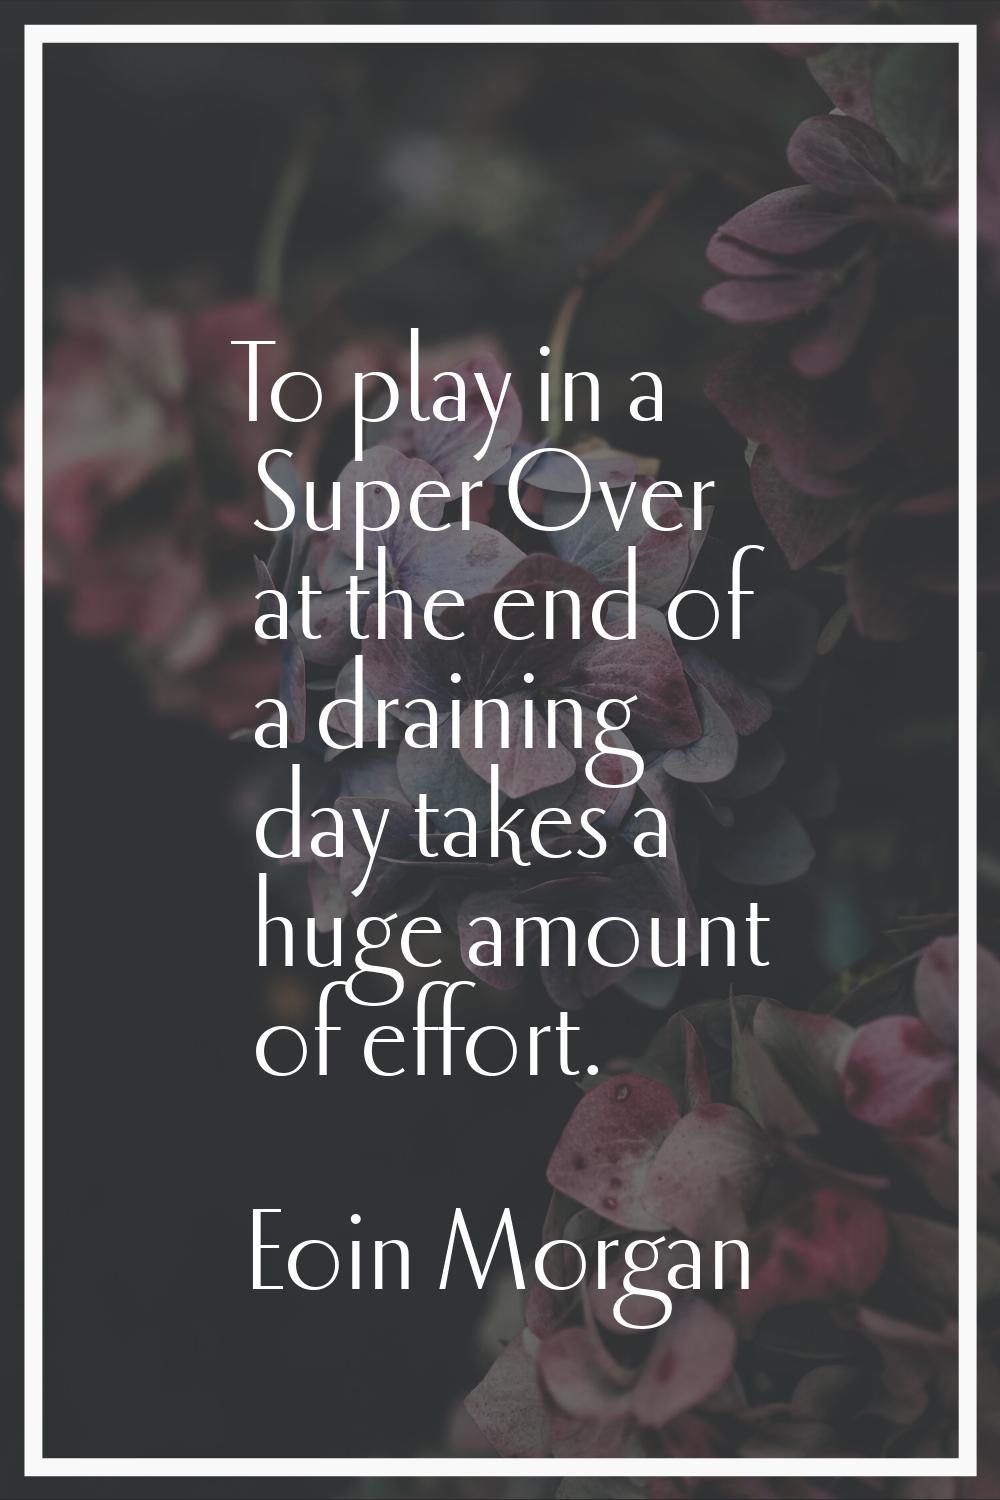 To play in a Super Over at the end of a draining day takes a huge amount of effort.